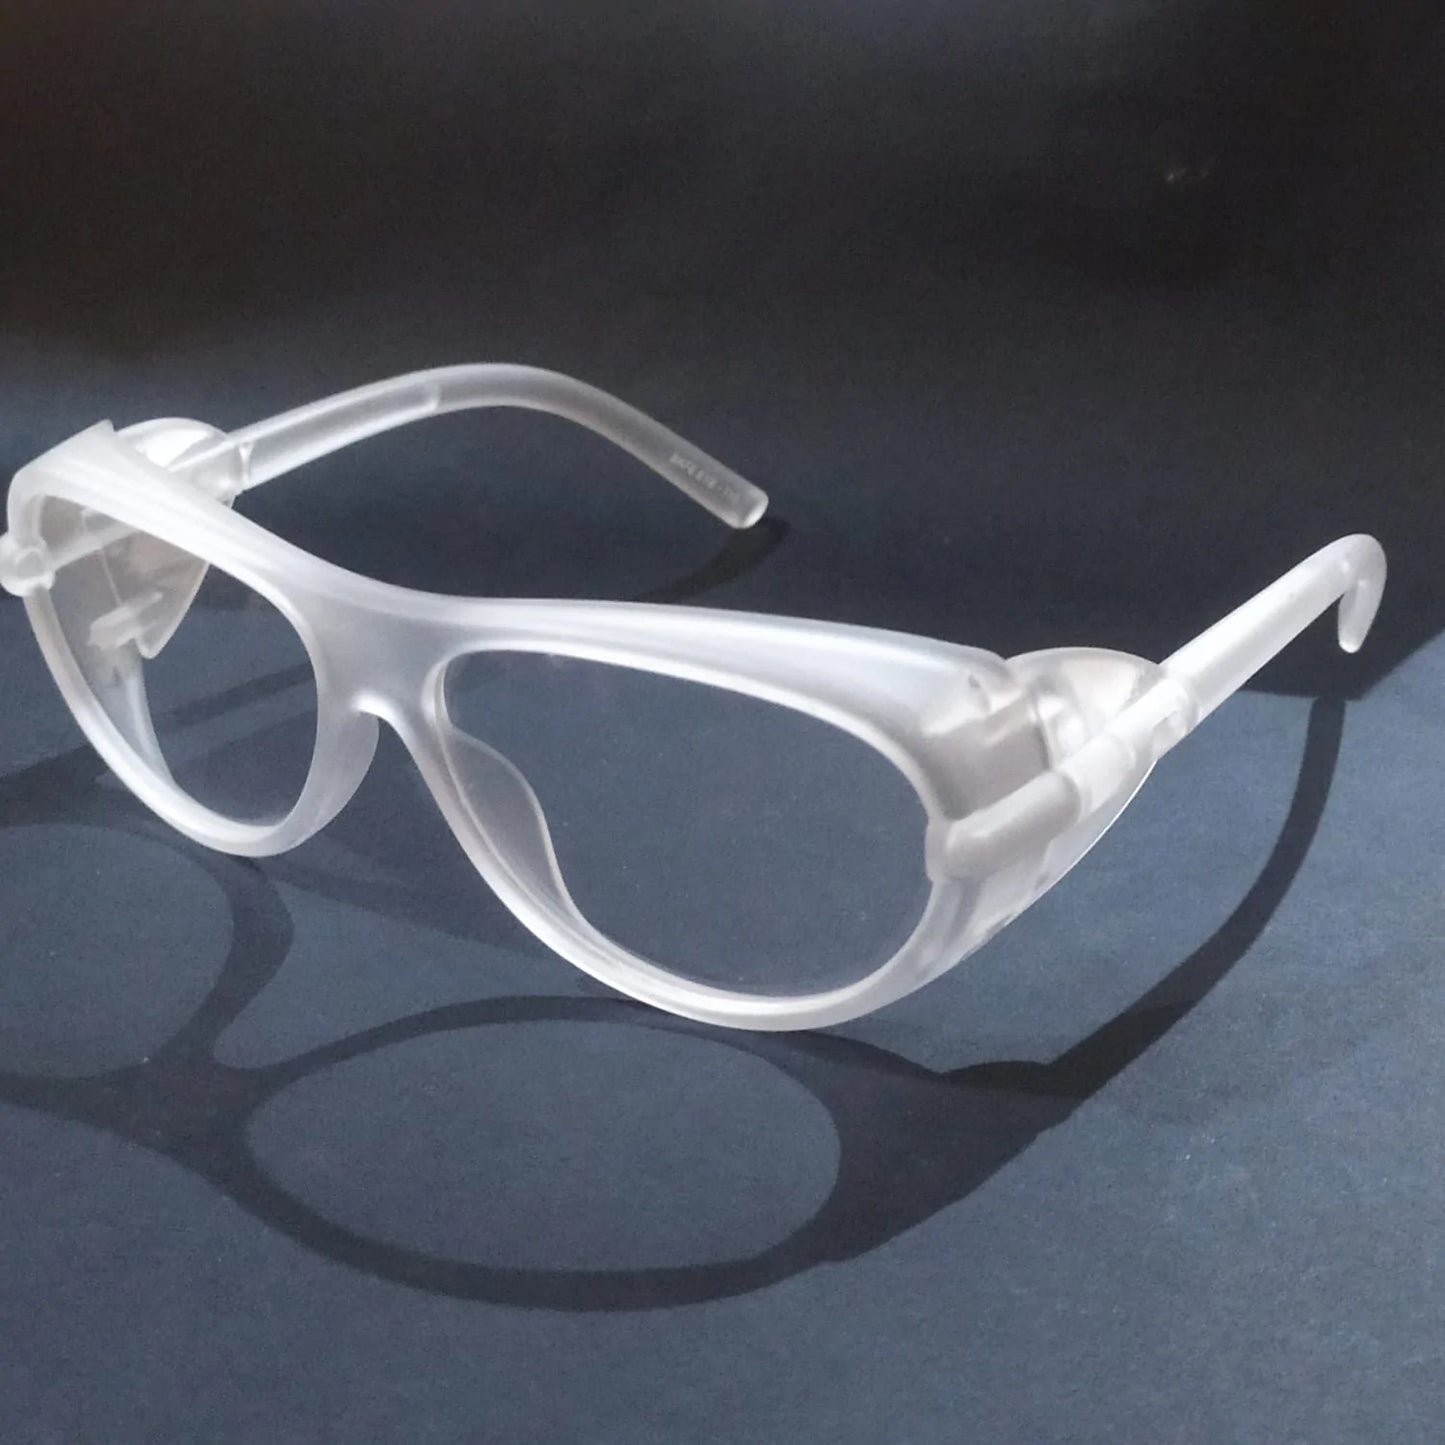 EYESafety Transparent Clear White Prescription Safety Glasses with Side Shield